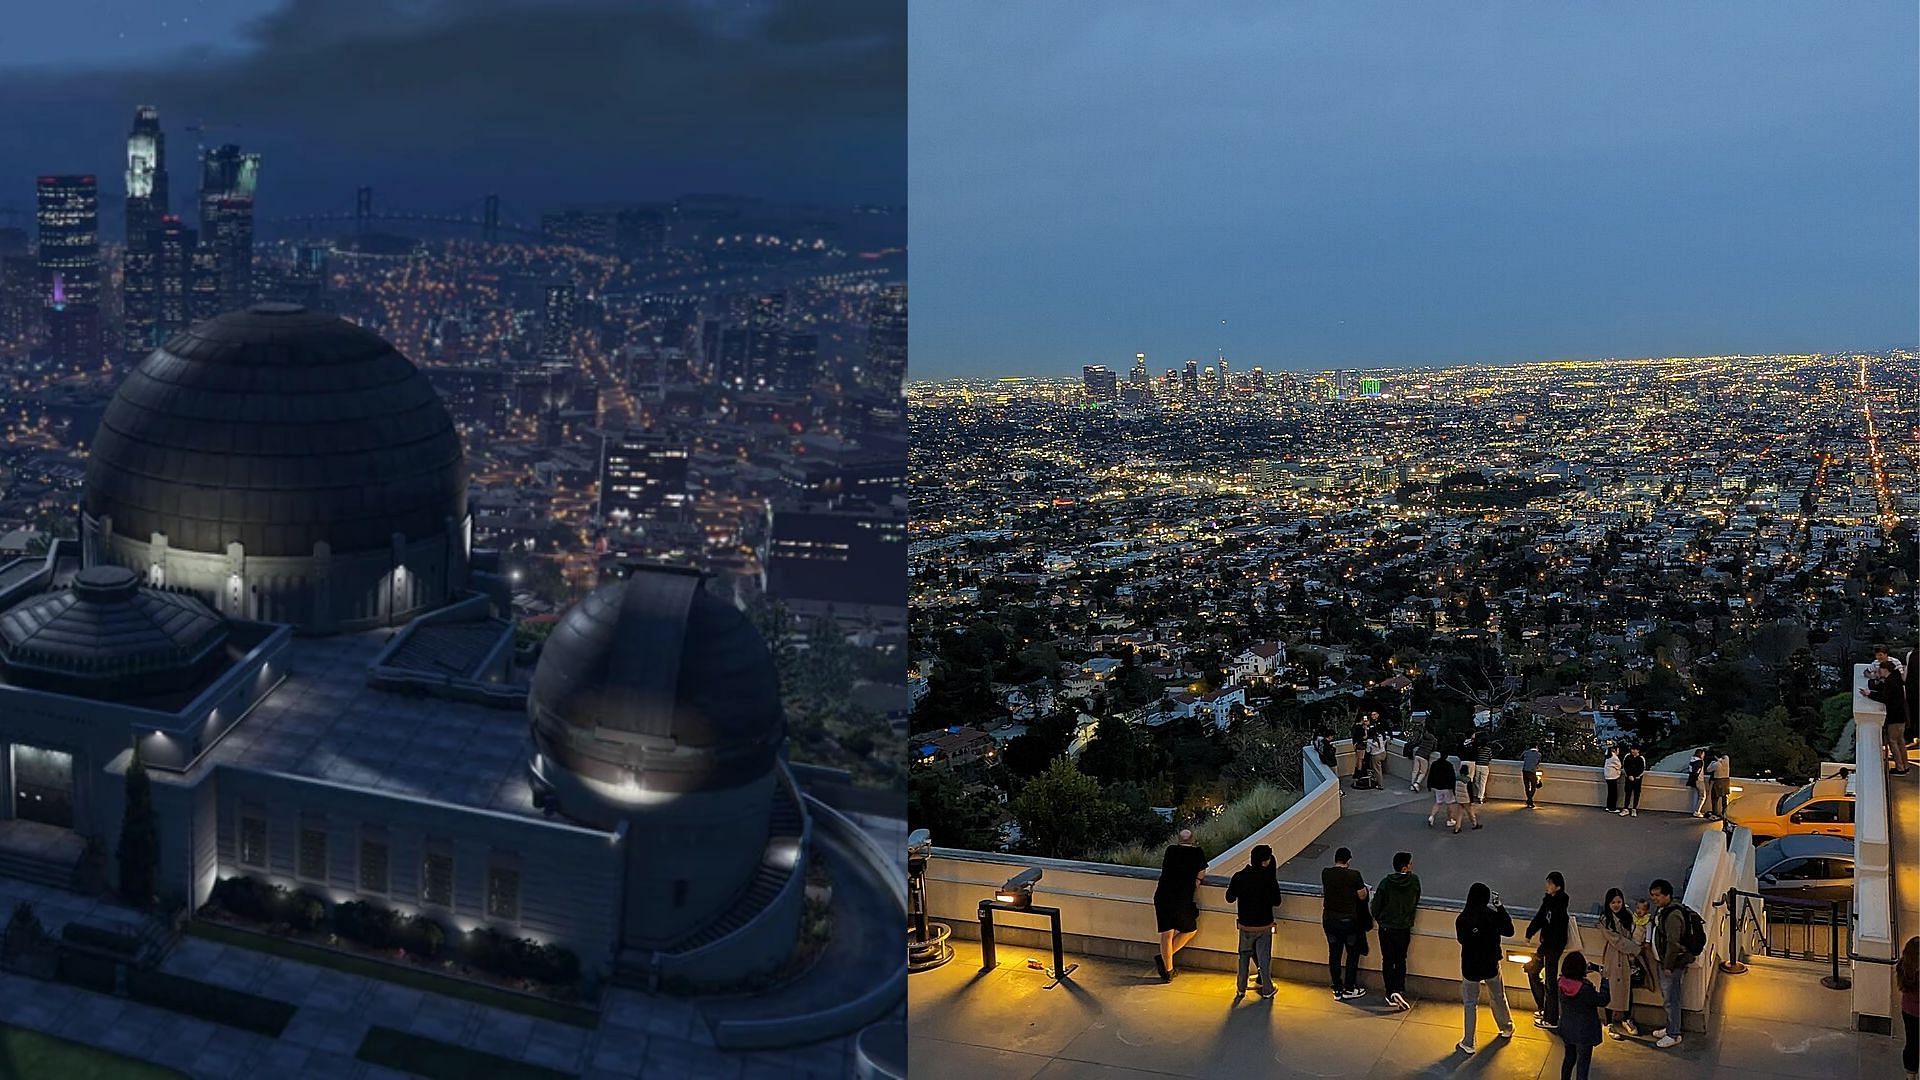 View from the Galileo Observatory and Griffith Observatory (Images via GTA Wiki, Wikipedia)